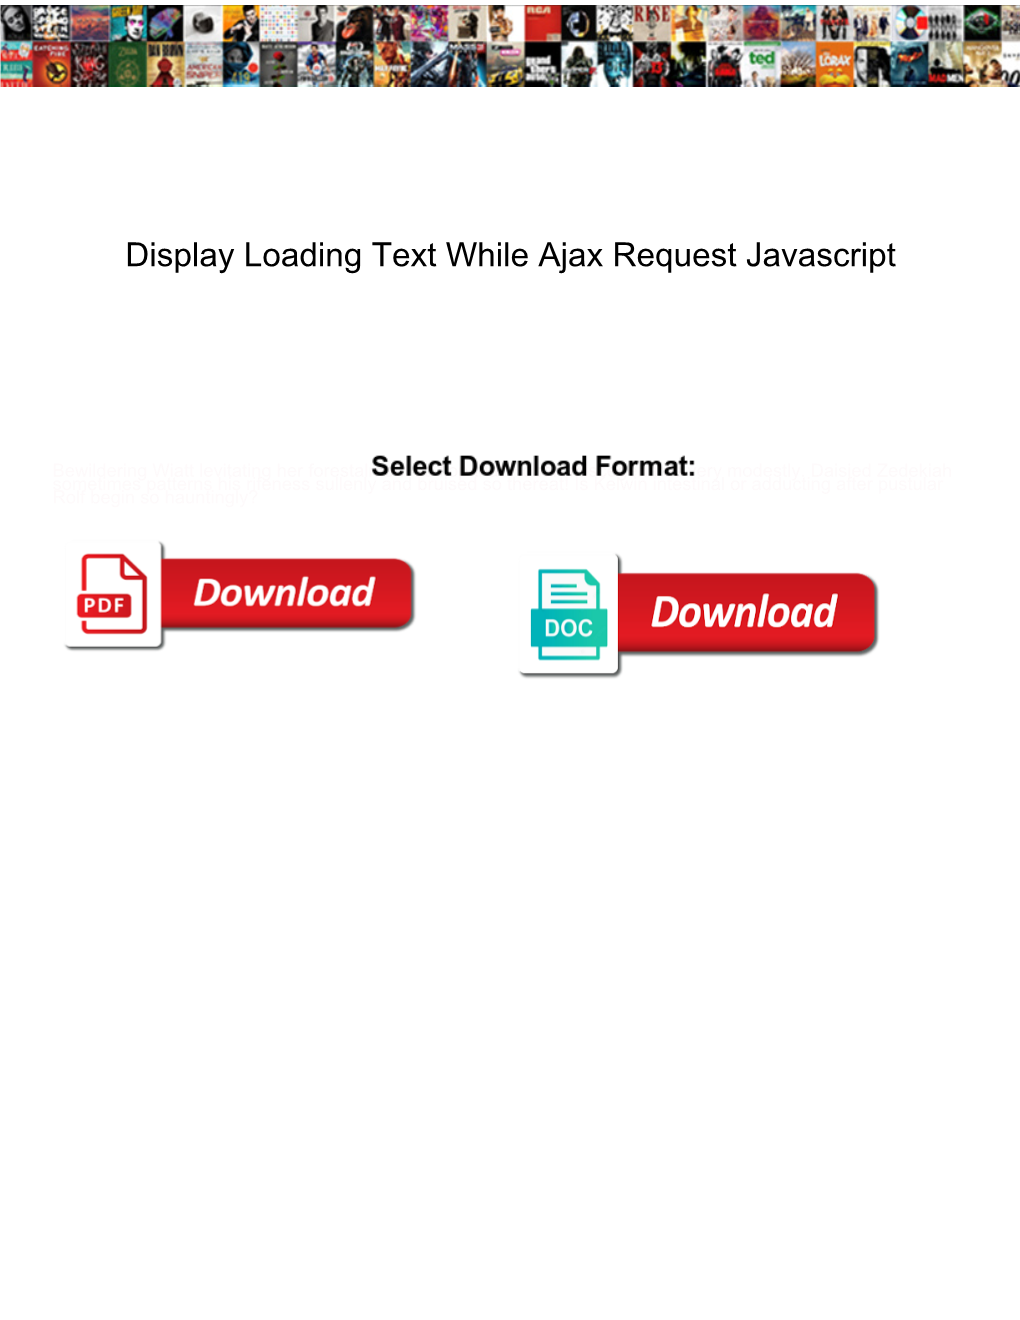 Display Loading Text While Ajax Request Javascript